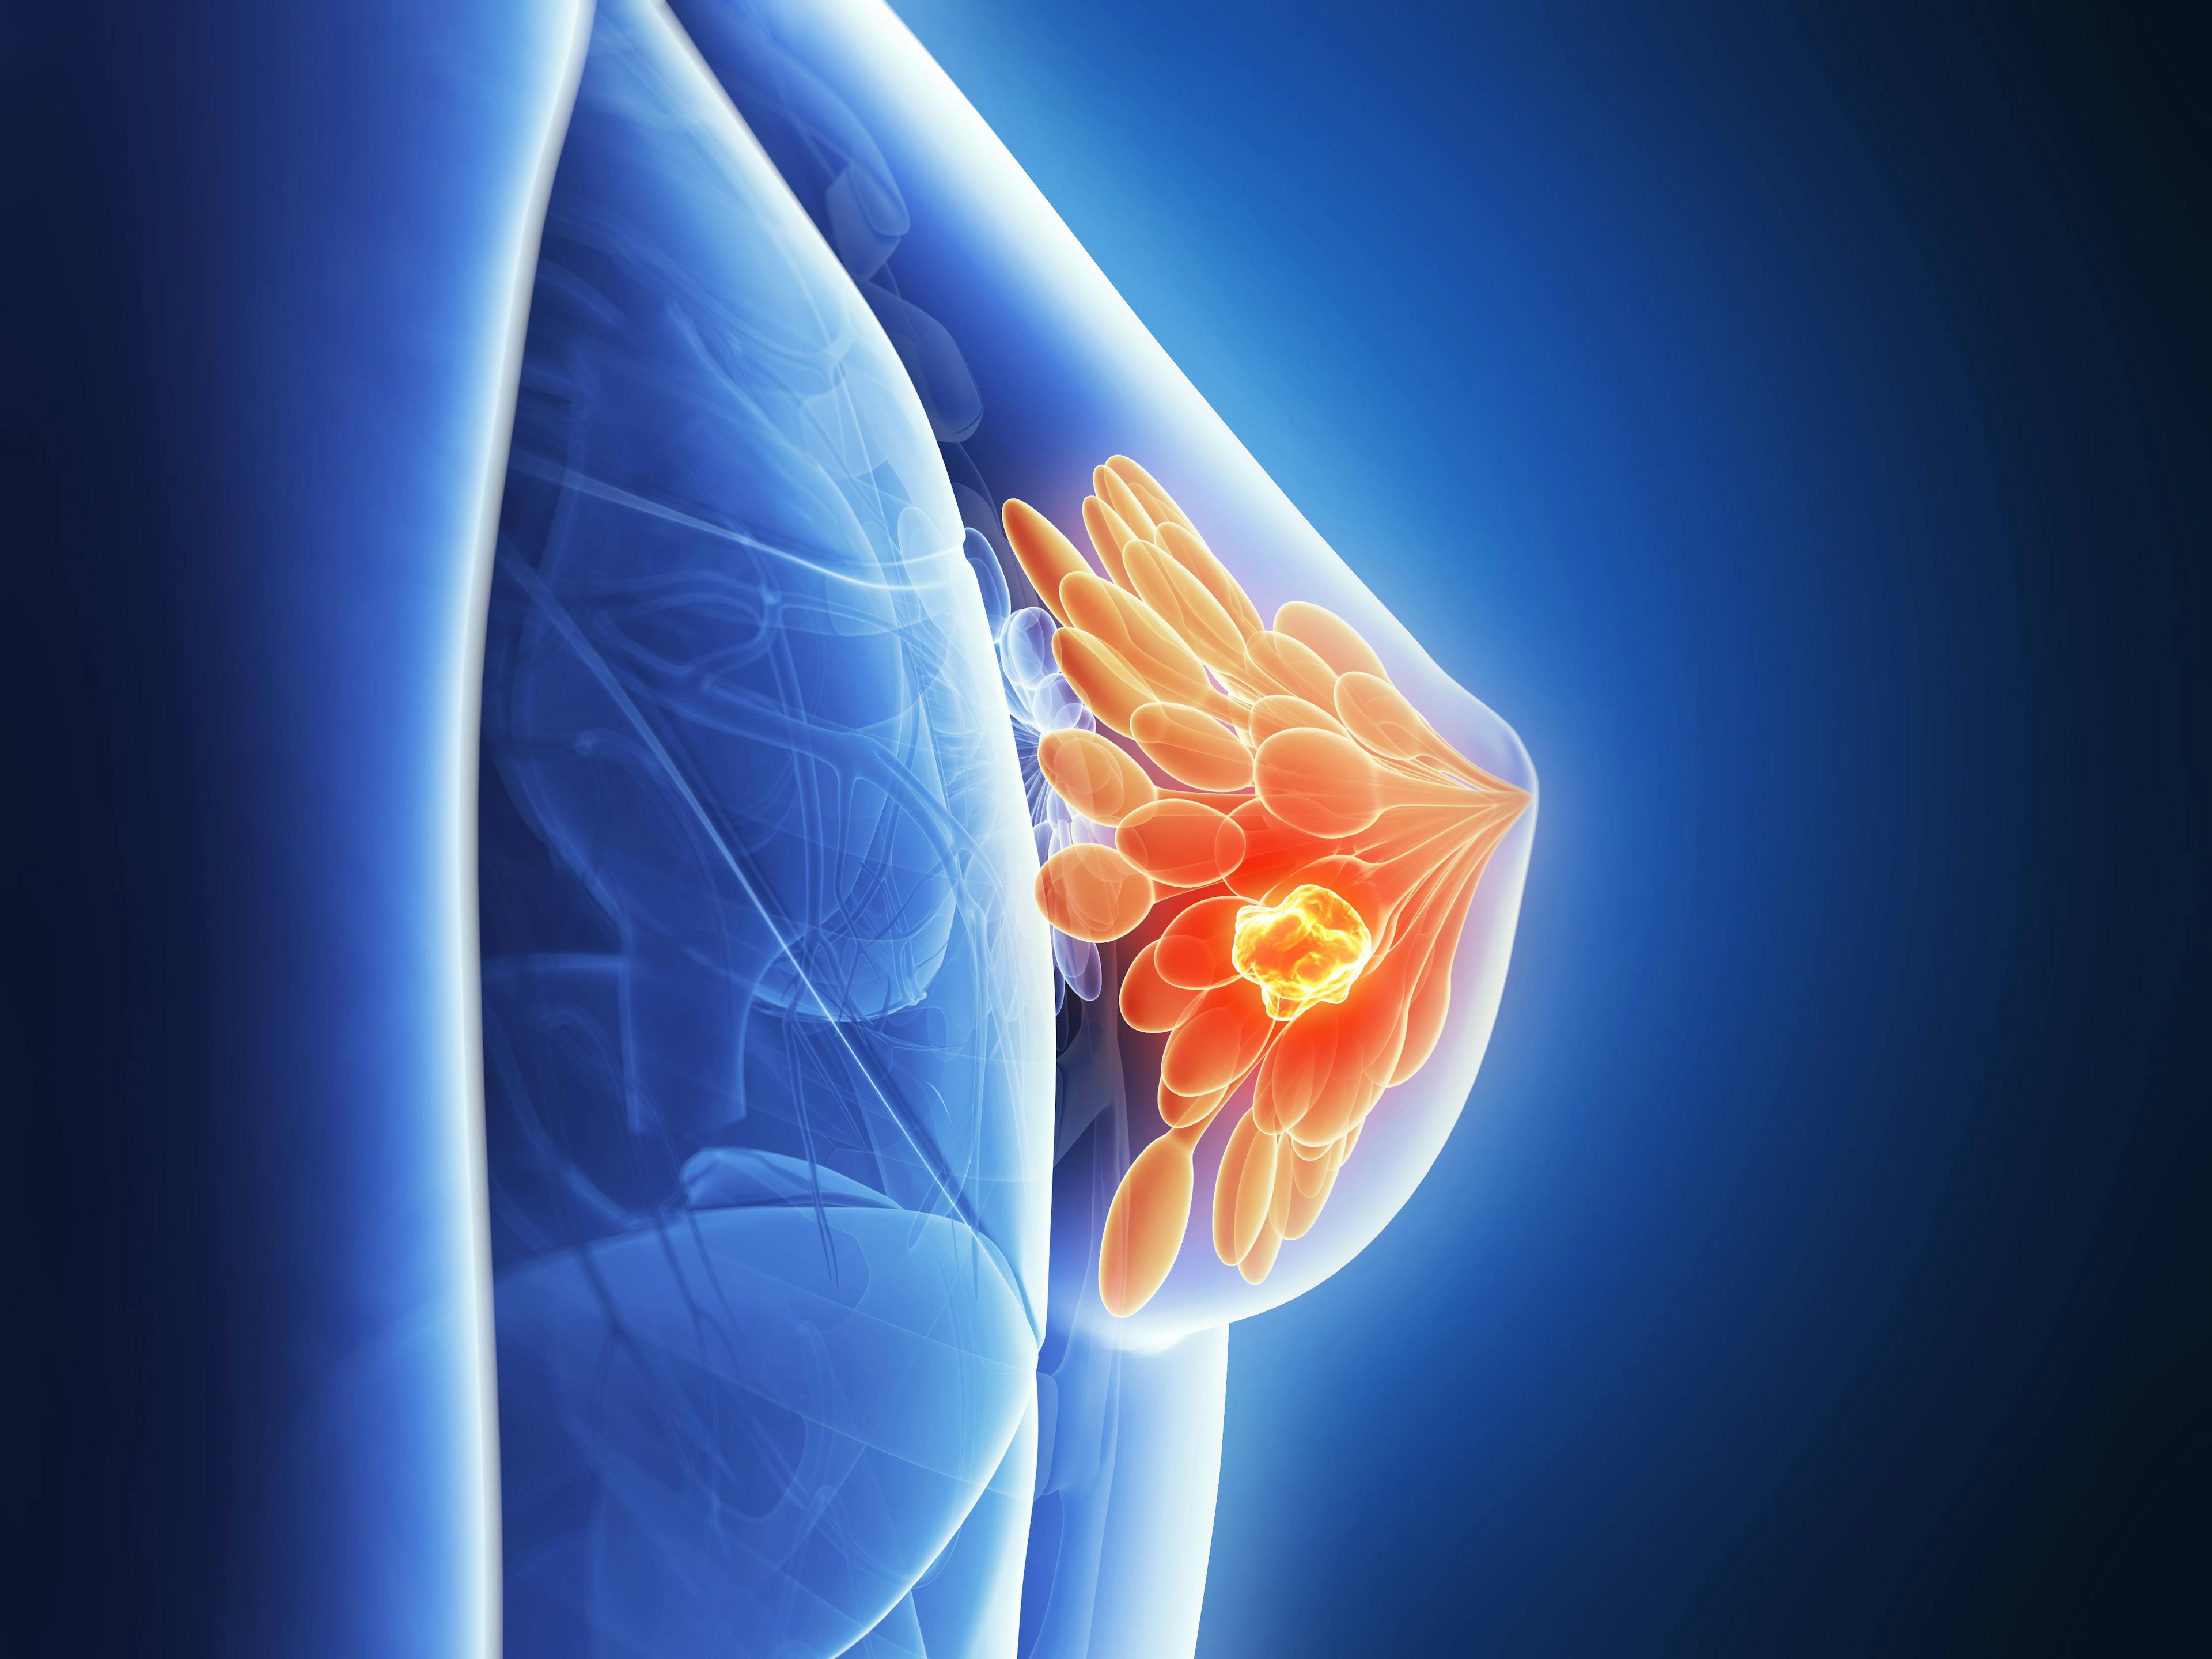 Pharmacists Can Improve Adherence, Counsel Patients With Breast Cancer